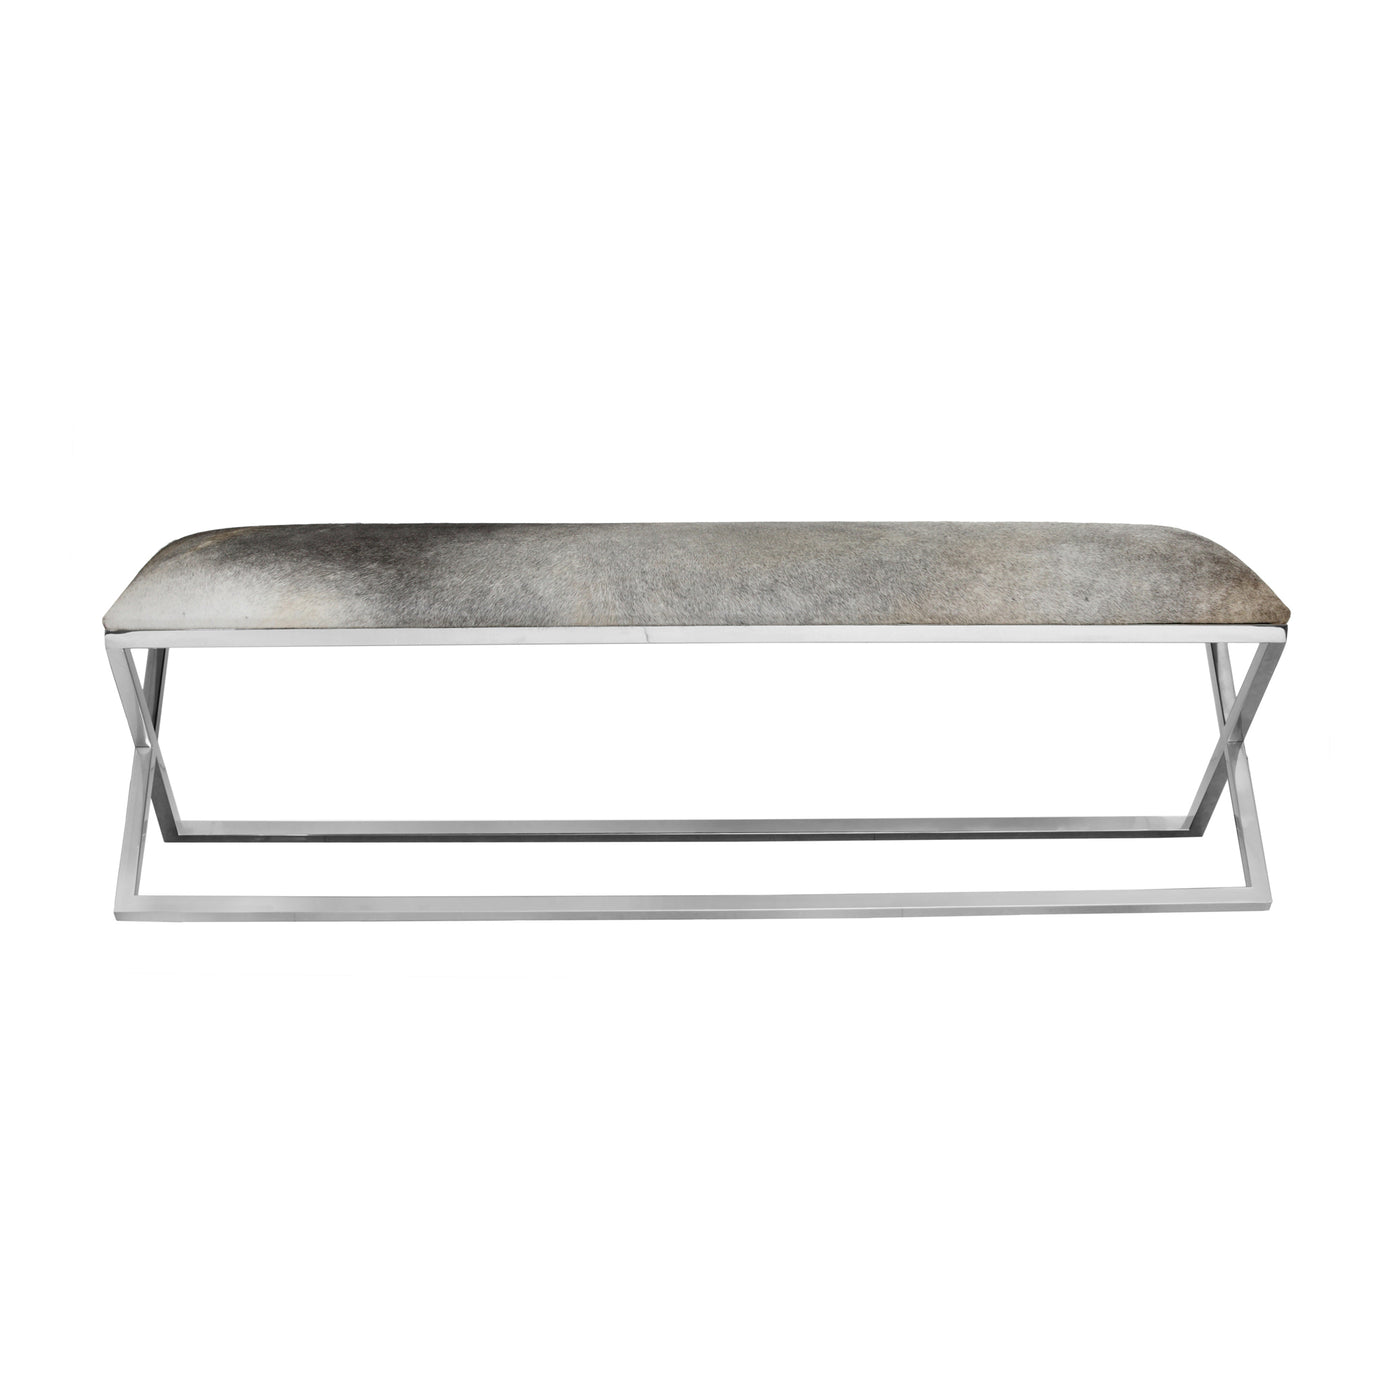 Glam by design, the Rossi Bench brings a luxurious statement to your space. With a solid stainless steel frame and cow hid...